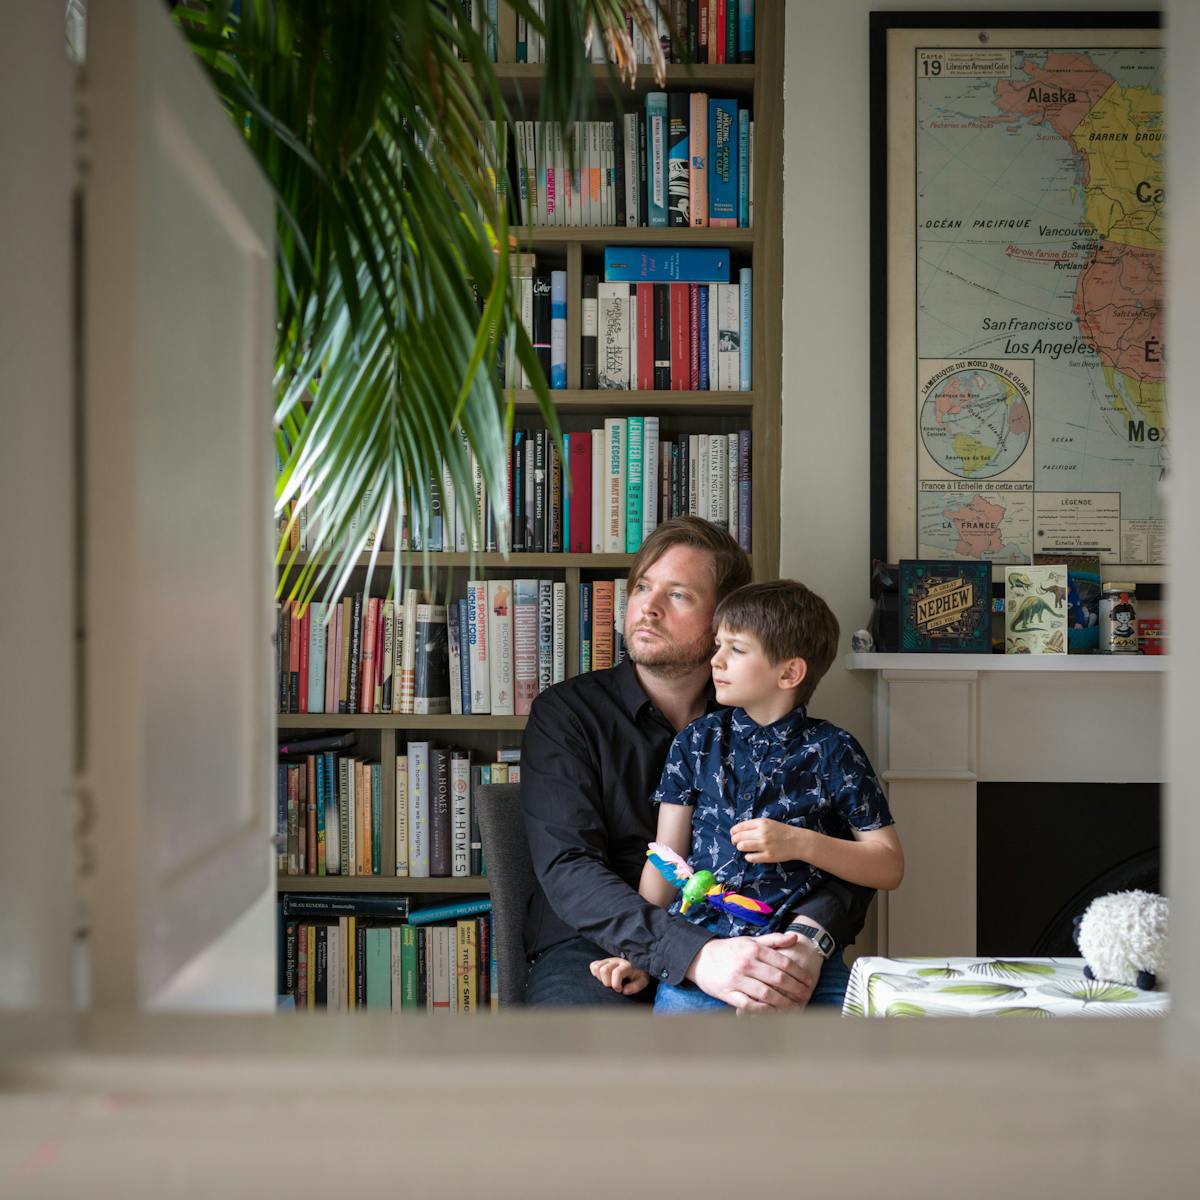 Photograph of a man sitting in a dining room with his arms around his son, sitting on his lap. Behind them is a bookcase and part of a world map. They are framed by the opening of a hatchway in the wall.